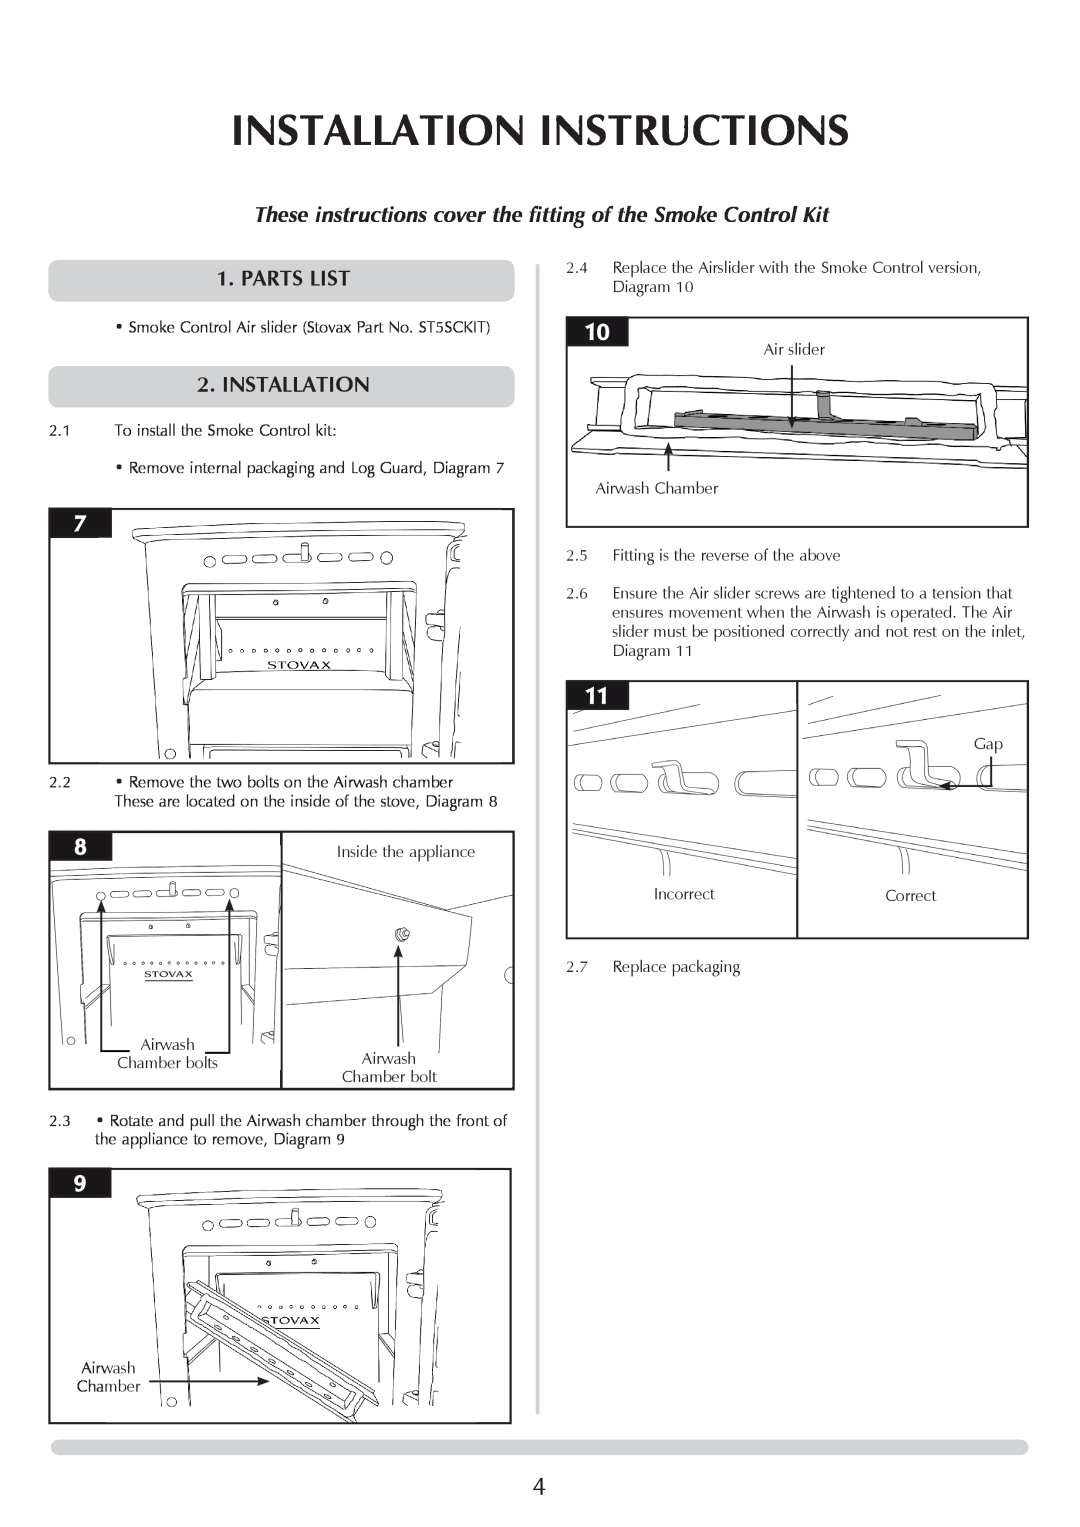 Stovax 7125F manual Installation Instructions, Parts List, These instructions cover the fitting of the Smoke Control Kit 